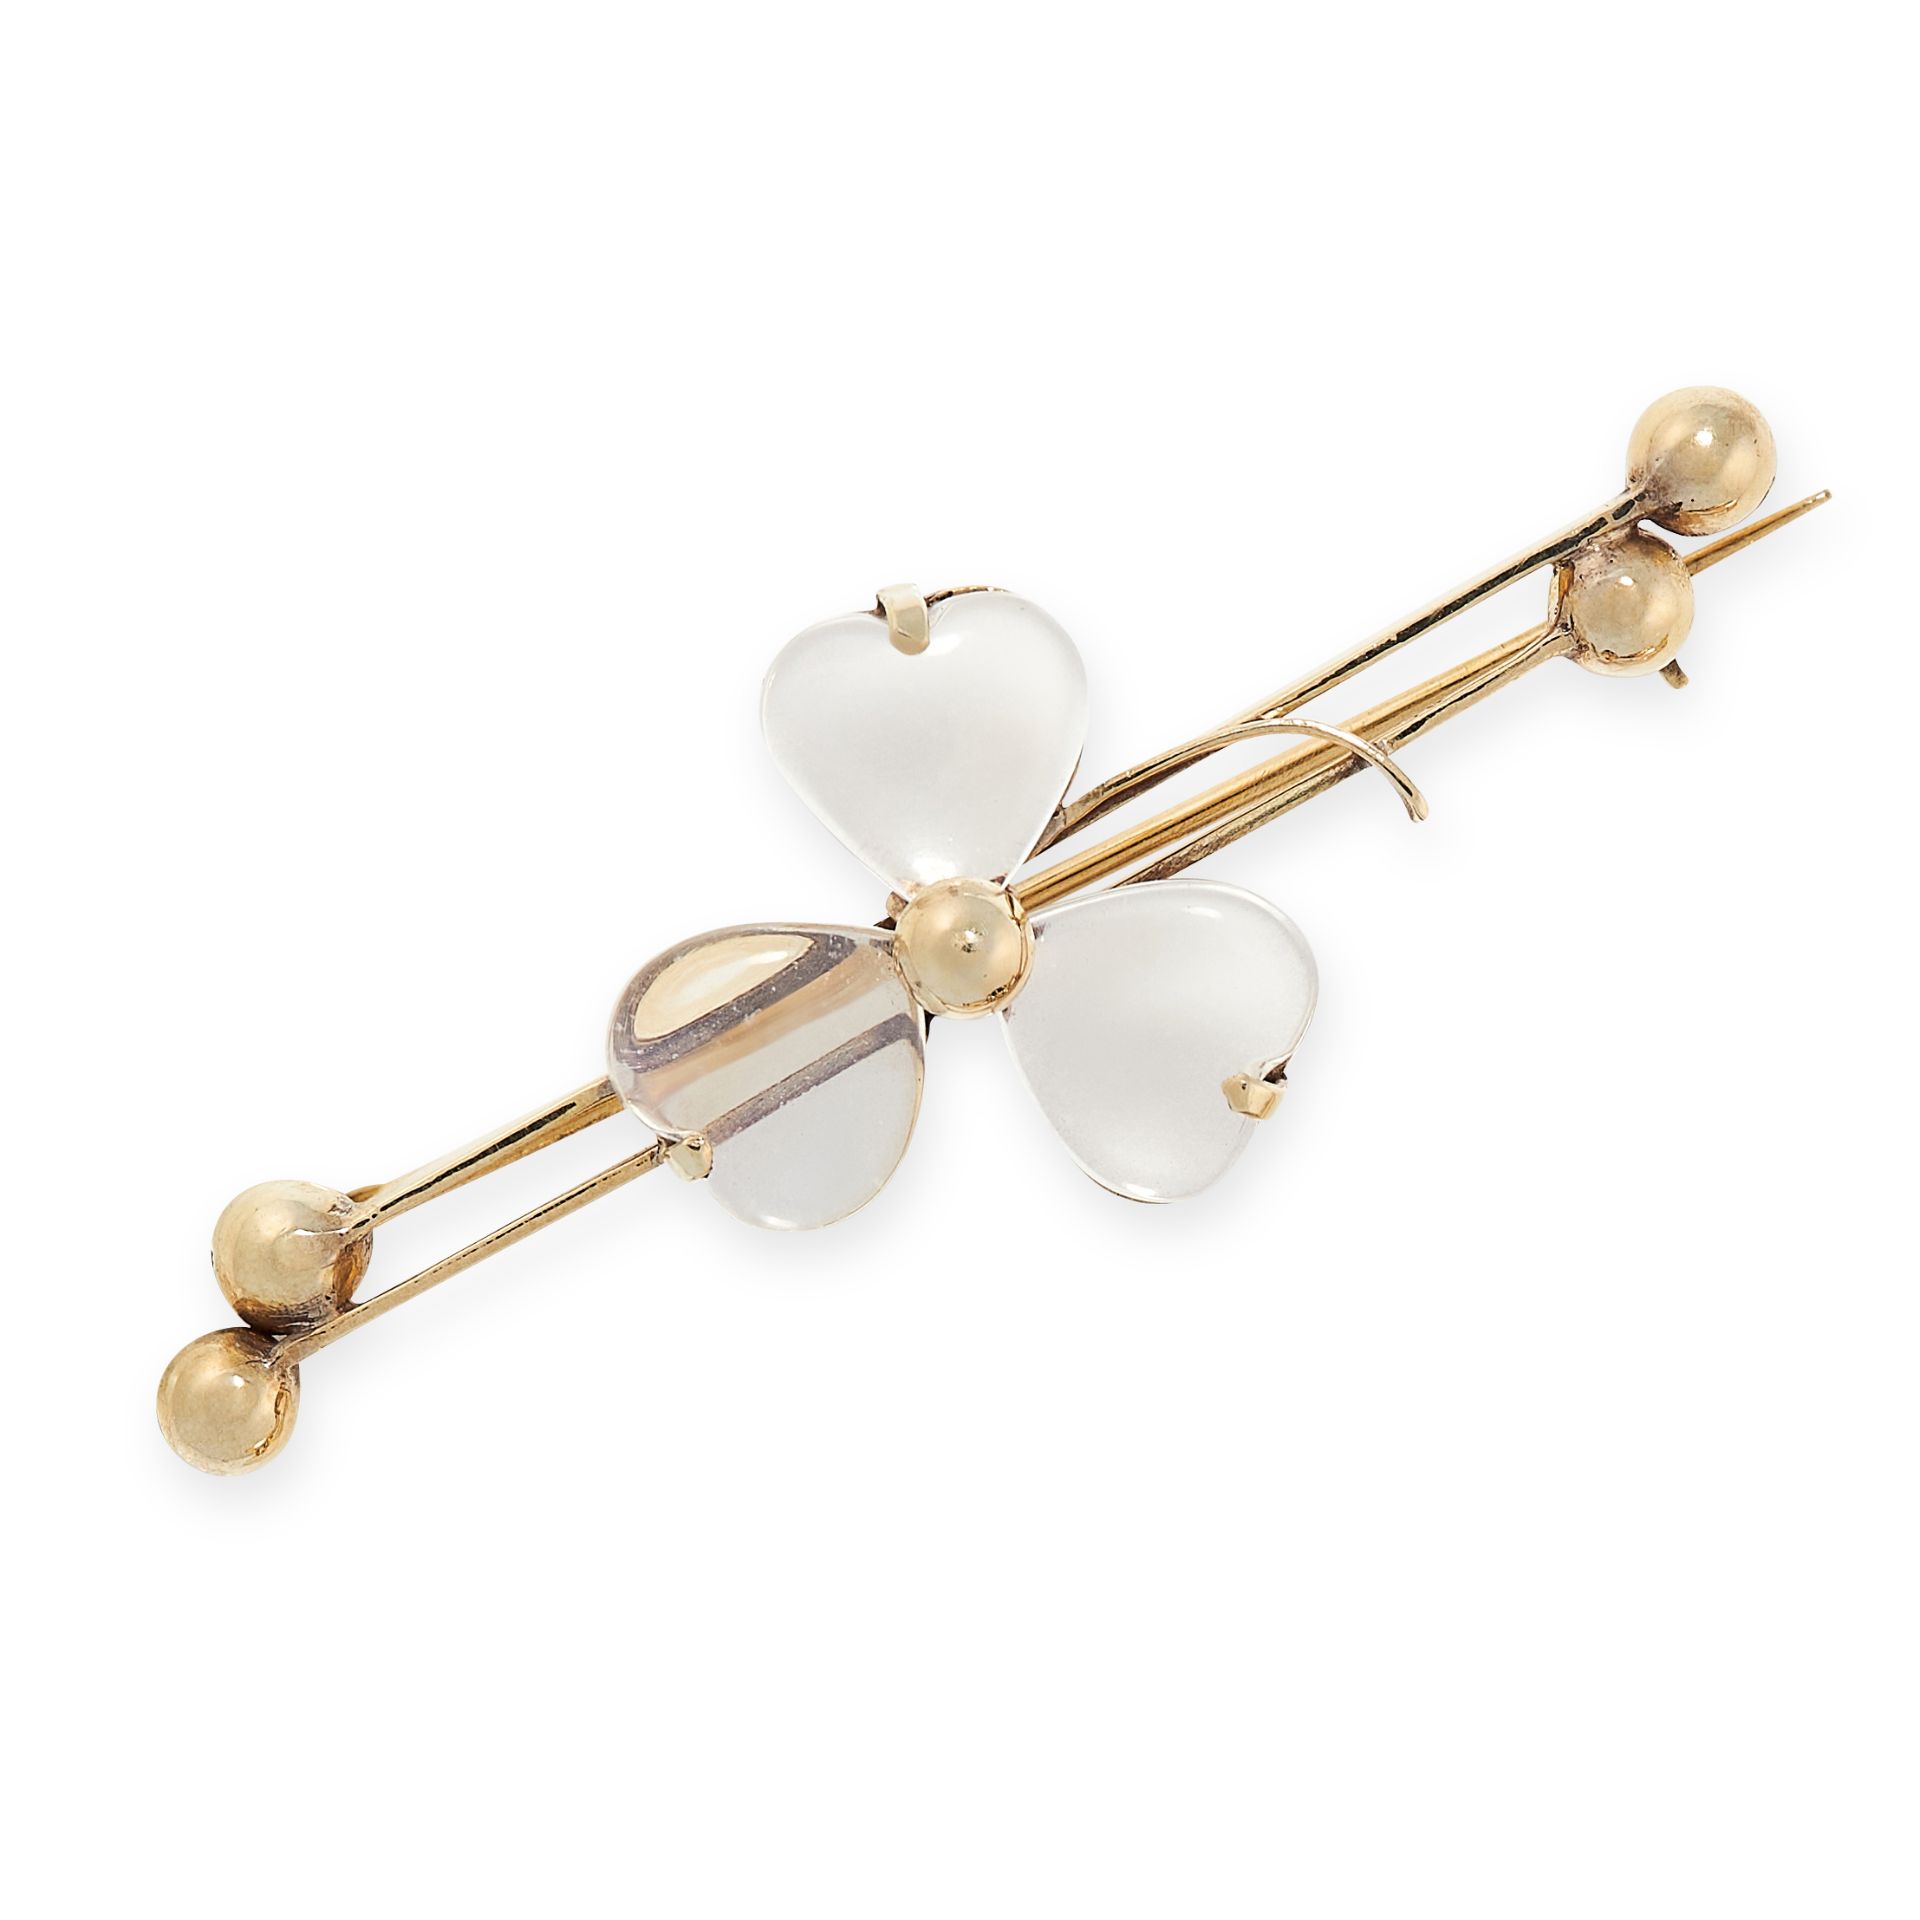 A MOONSTONE SHAMROCK BROOCH, EARLY 20TH CENTURY in 14ct yellow gold, set with a trio of heart shaped